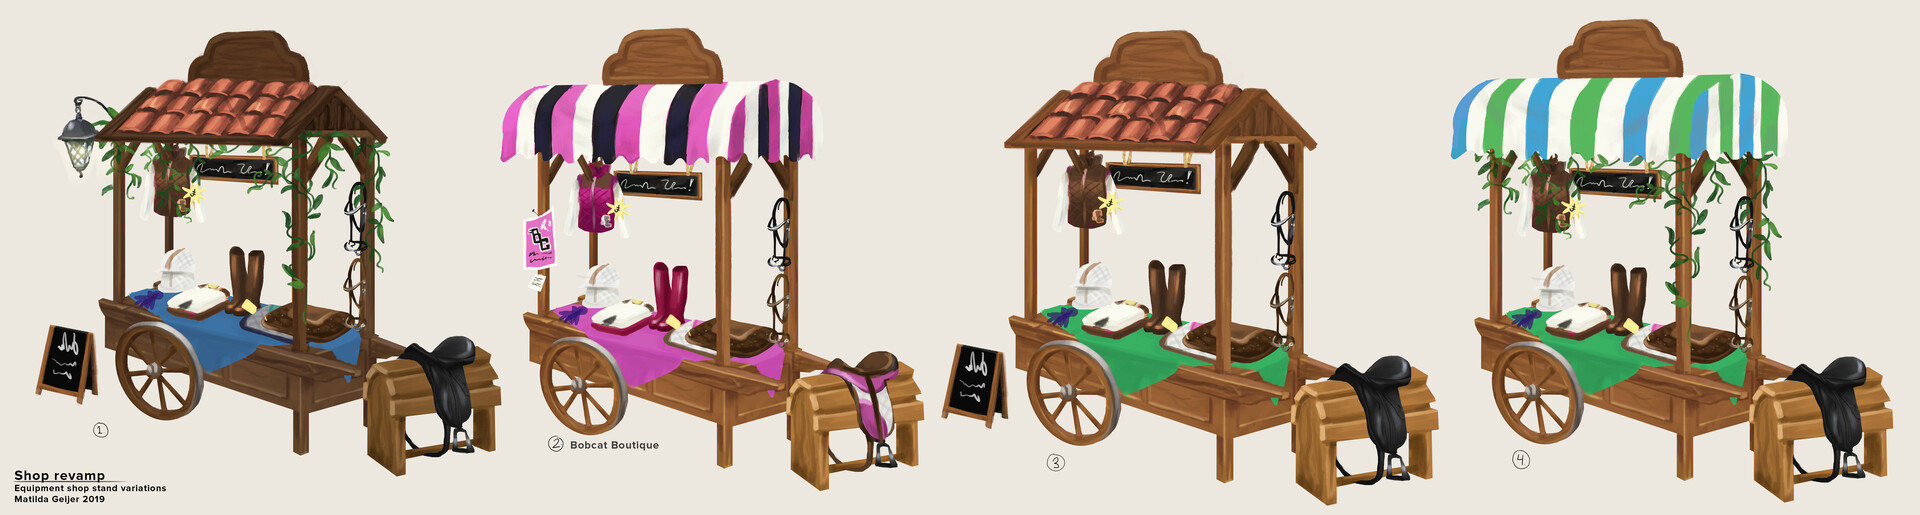 star stable official shop